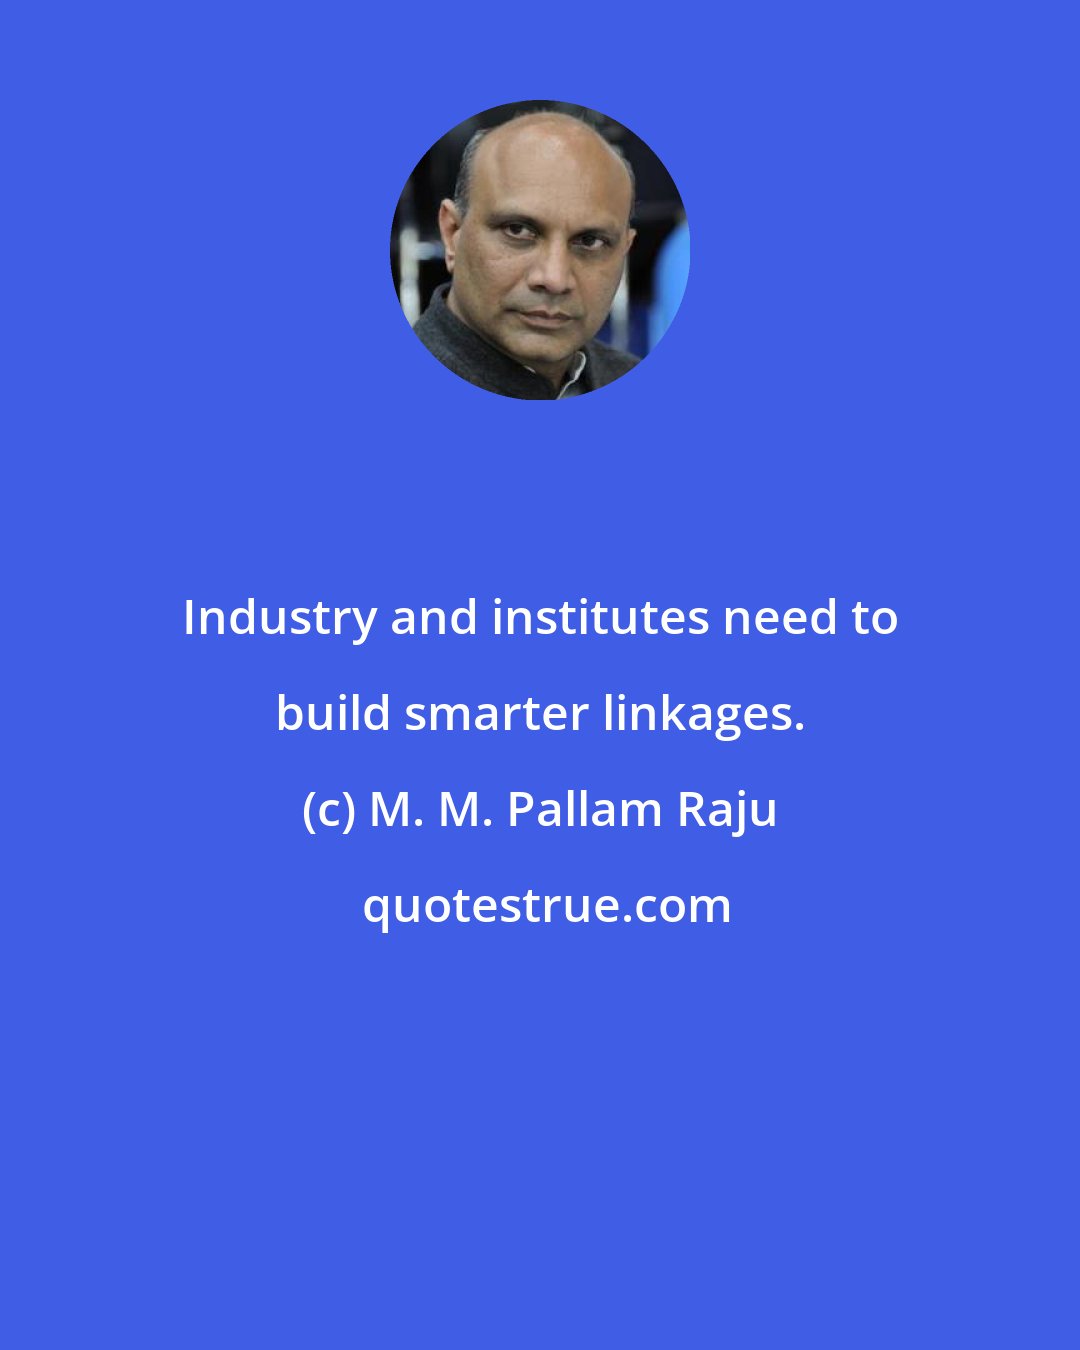 M. M. Pallam Raju: Industry and institutes need to build smarter linkages.